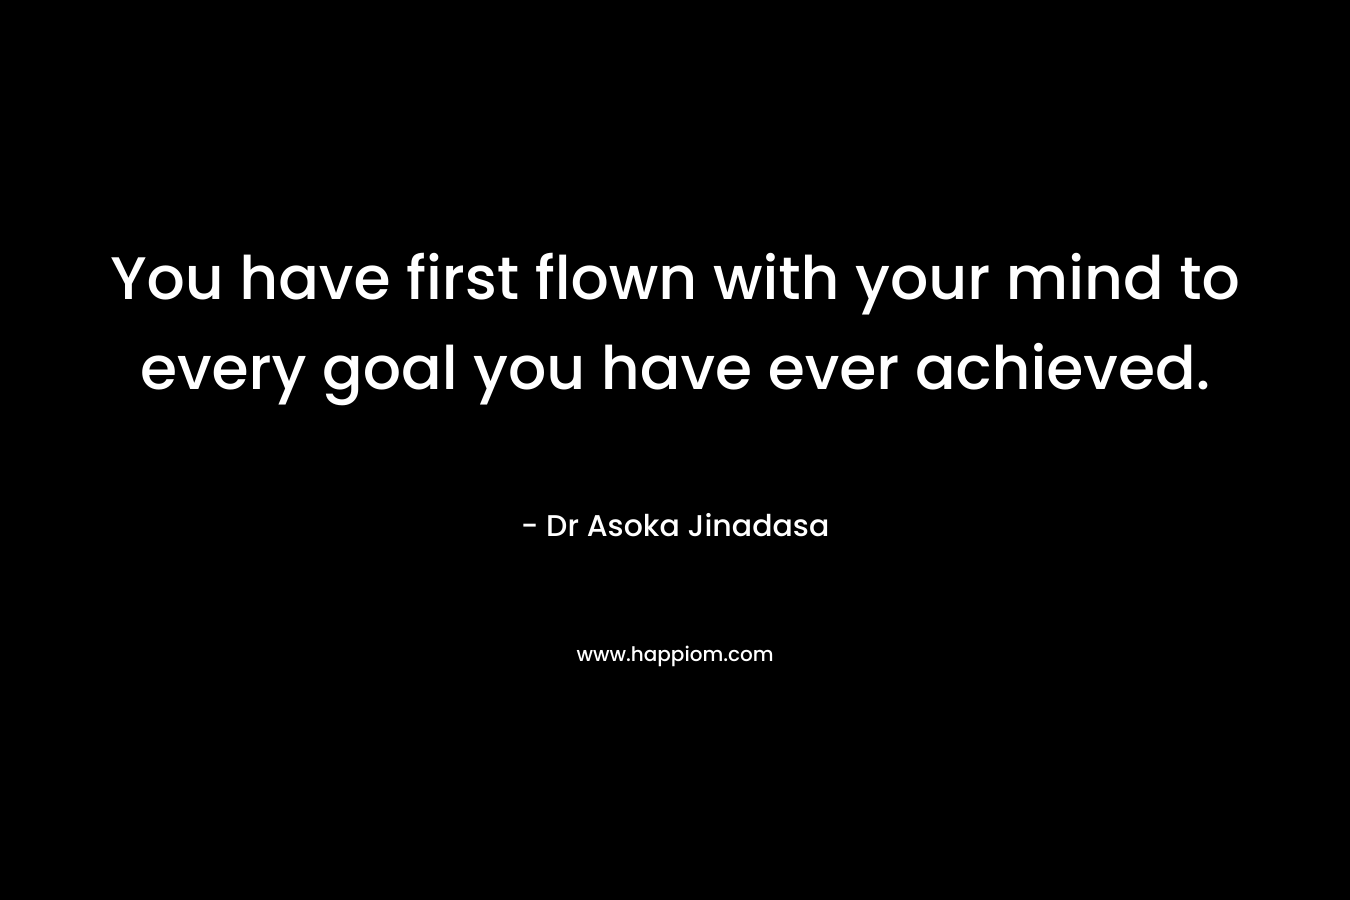 You have first flown with your mind to every goal you have ever achieved. – Dr Asoka Jinadasa